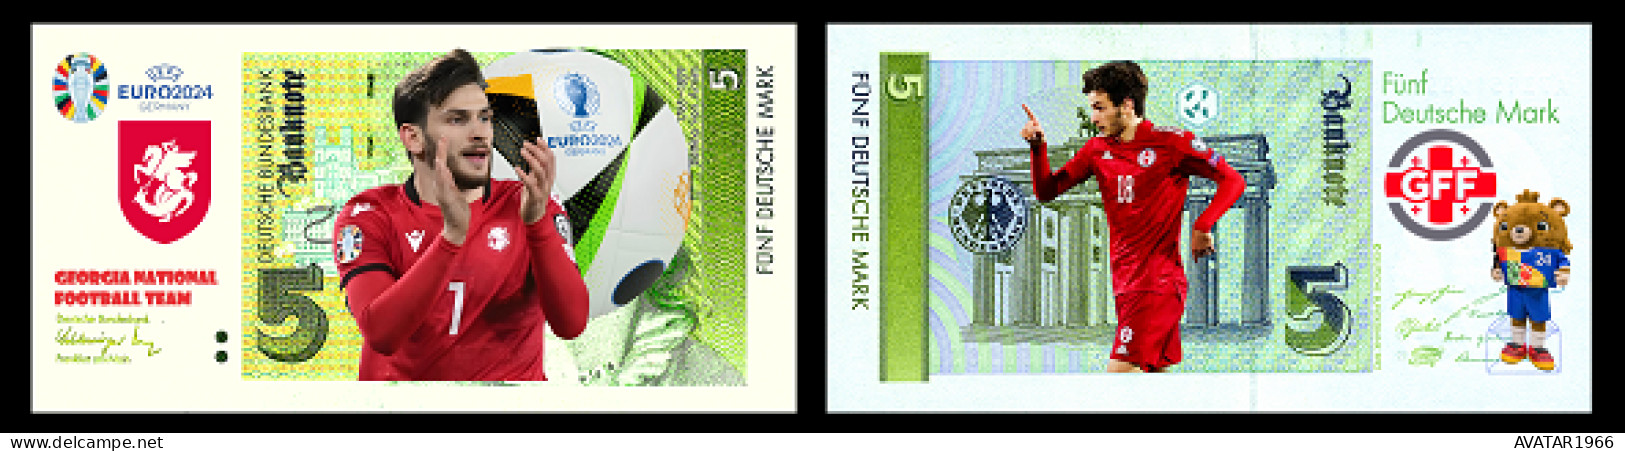 UEFA European Football Championship 2024 Qualified Country   Georgia 8 Pieces Germany Fantasy Paper Money - [15] Commemoratives & Special Issues